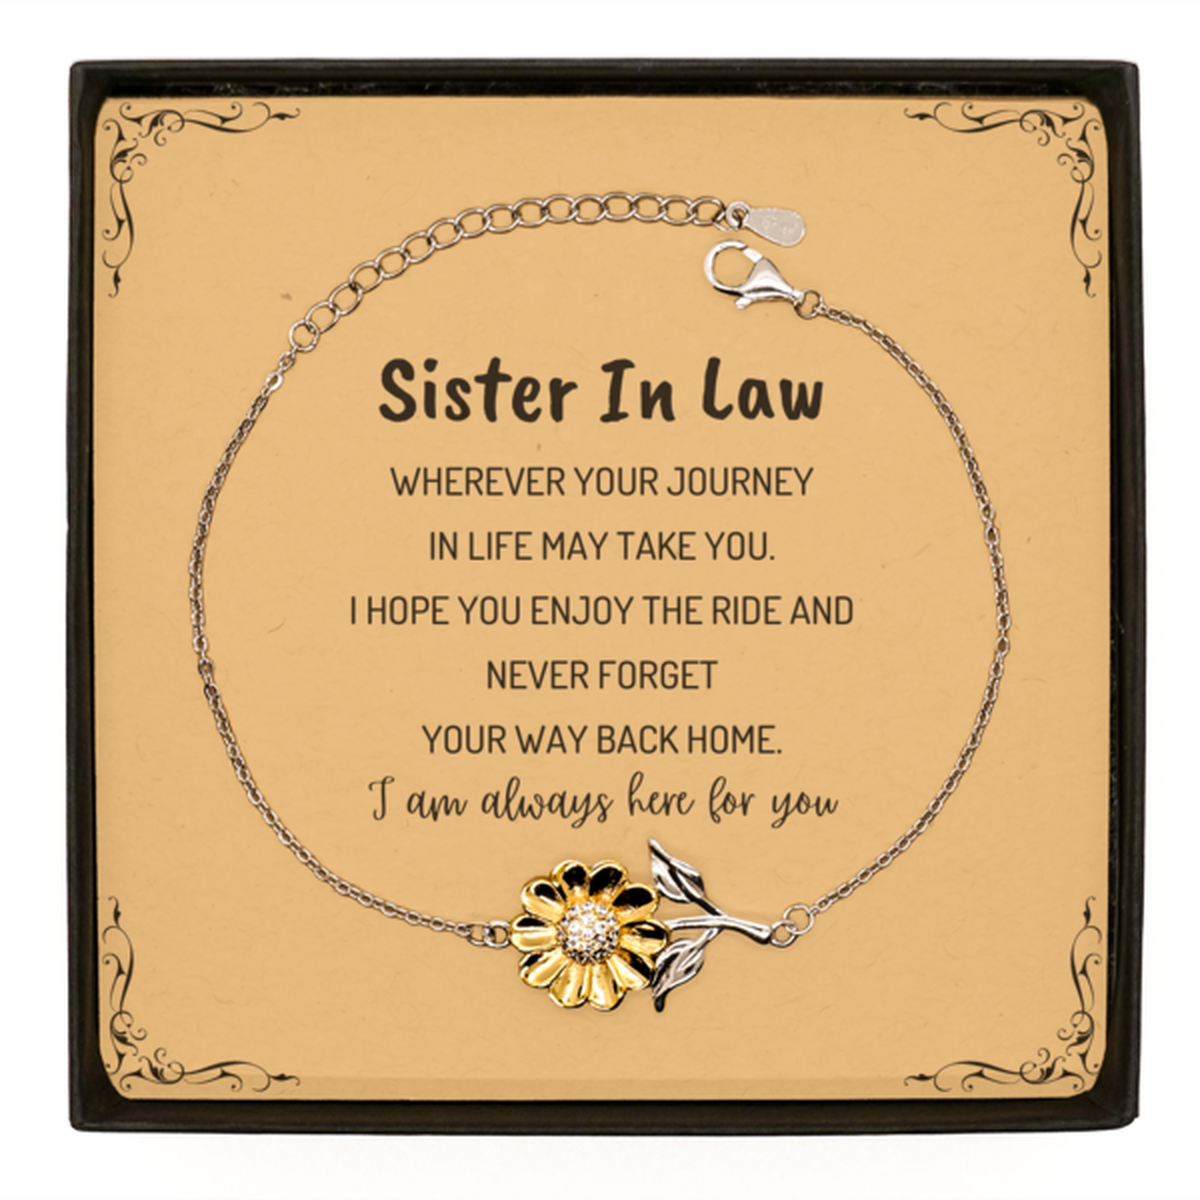 Sister In Law wherever your journey in life may take you, I am always here for you Sister In Law Sunflower Bracelet, Awesome Christmas Gifts For Sister In Law Message Card, Sister In Law Birthday Gifts for Men Women Family Loved One